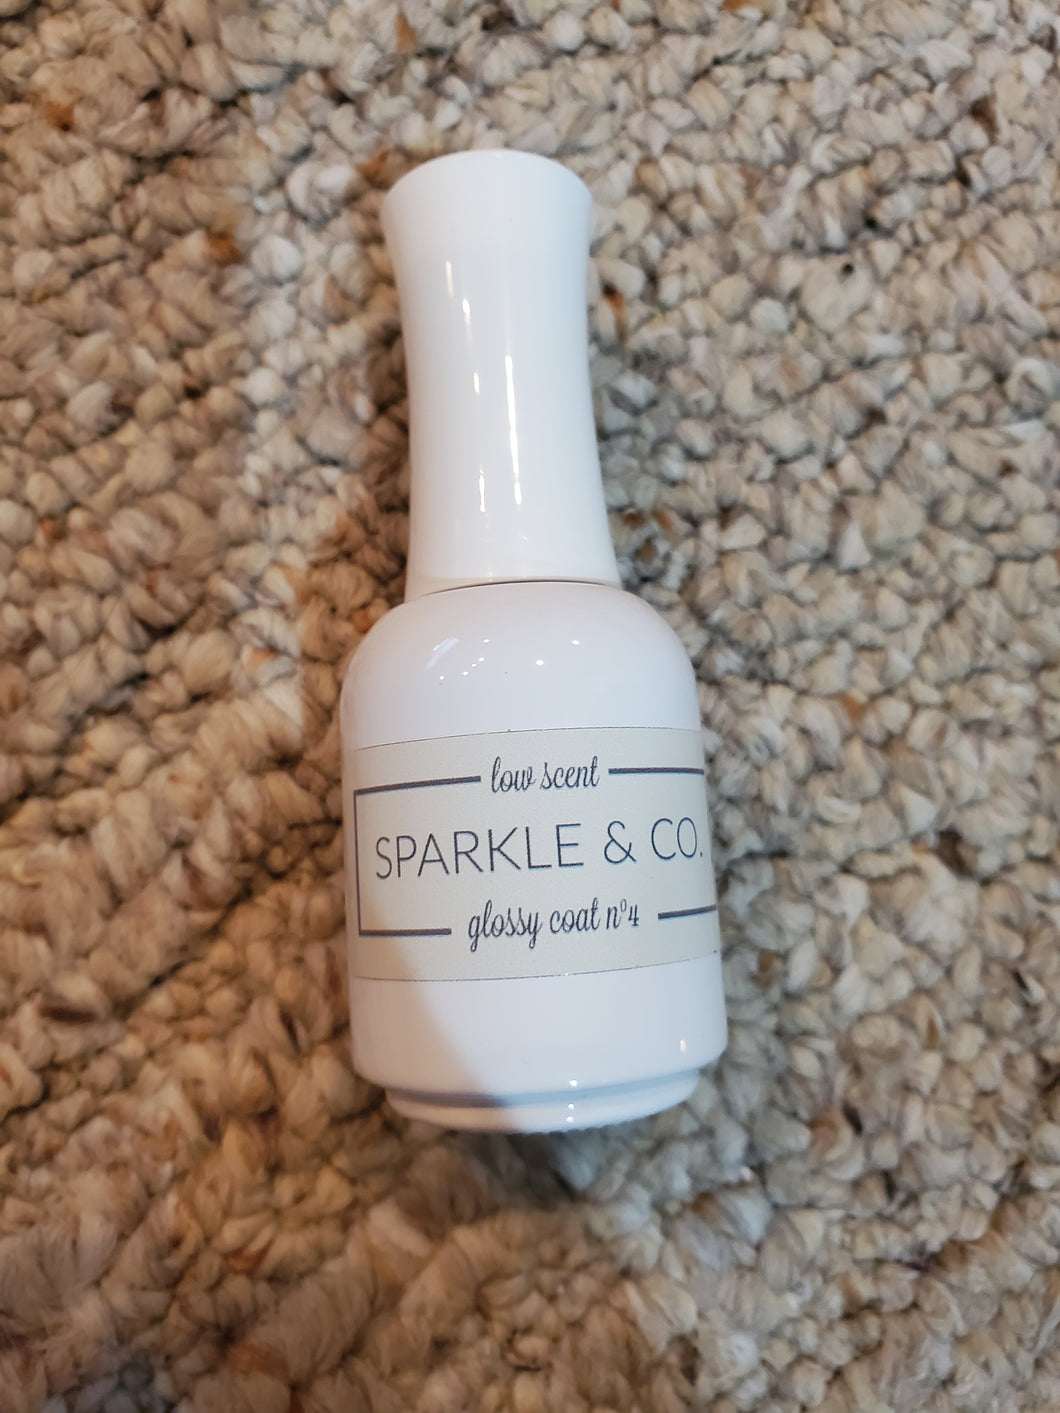 Sparkle & Co. Glossy Top Coat - Low Scent